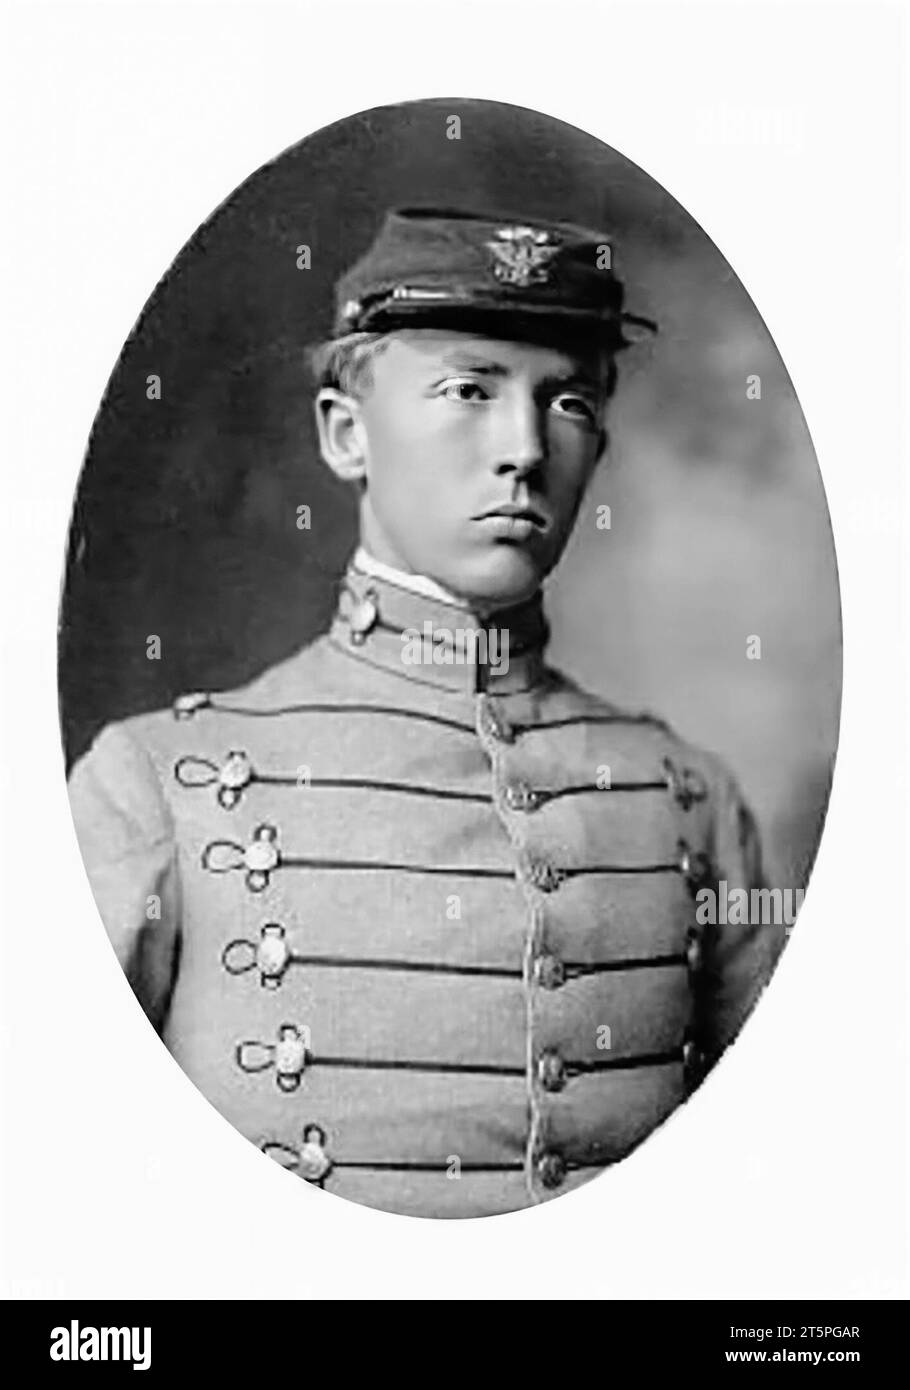 George Patton. Portrait of the American General, George Smith Patton Jr. (1885-1945) as a cadet at Virginia Military Institute in early 1900s Stock Photo